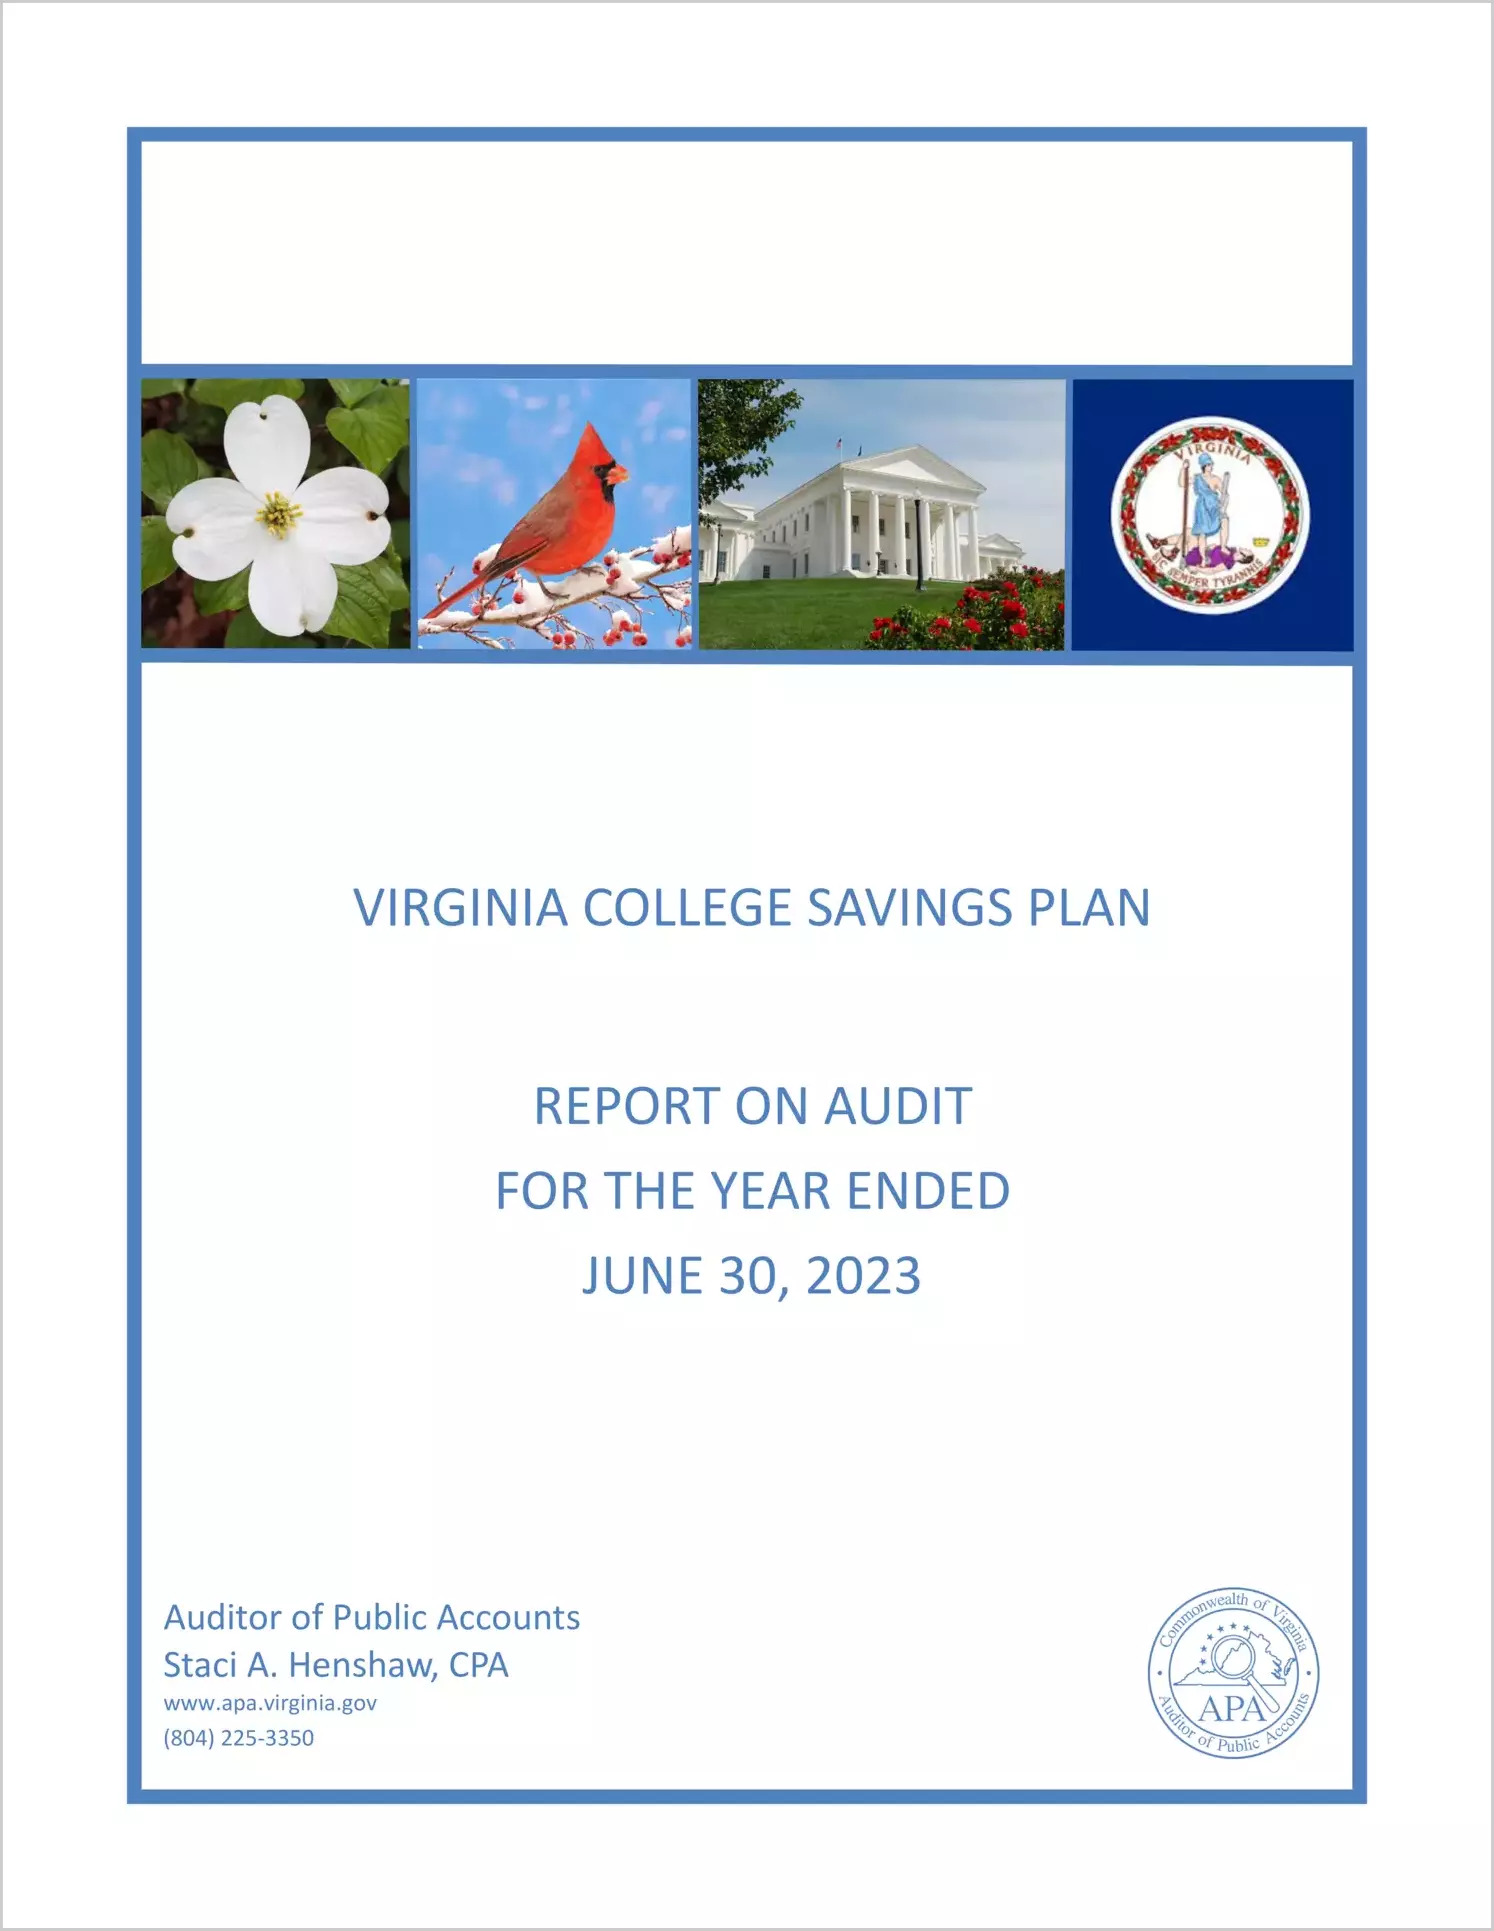 Virginia College Savings Plan for the year ended June 30, 2023